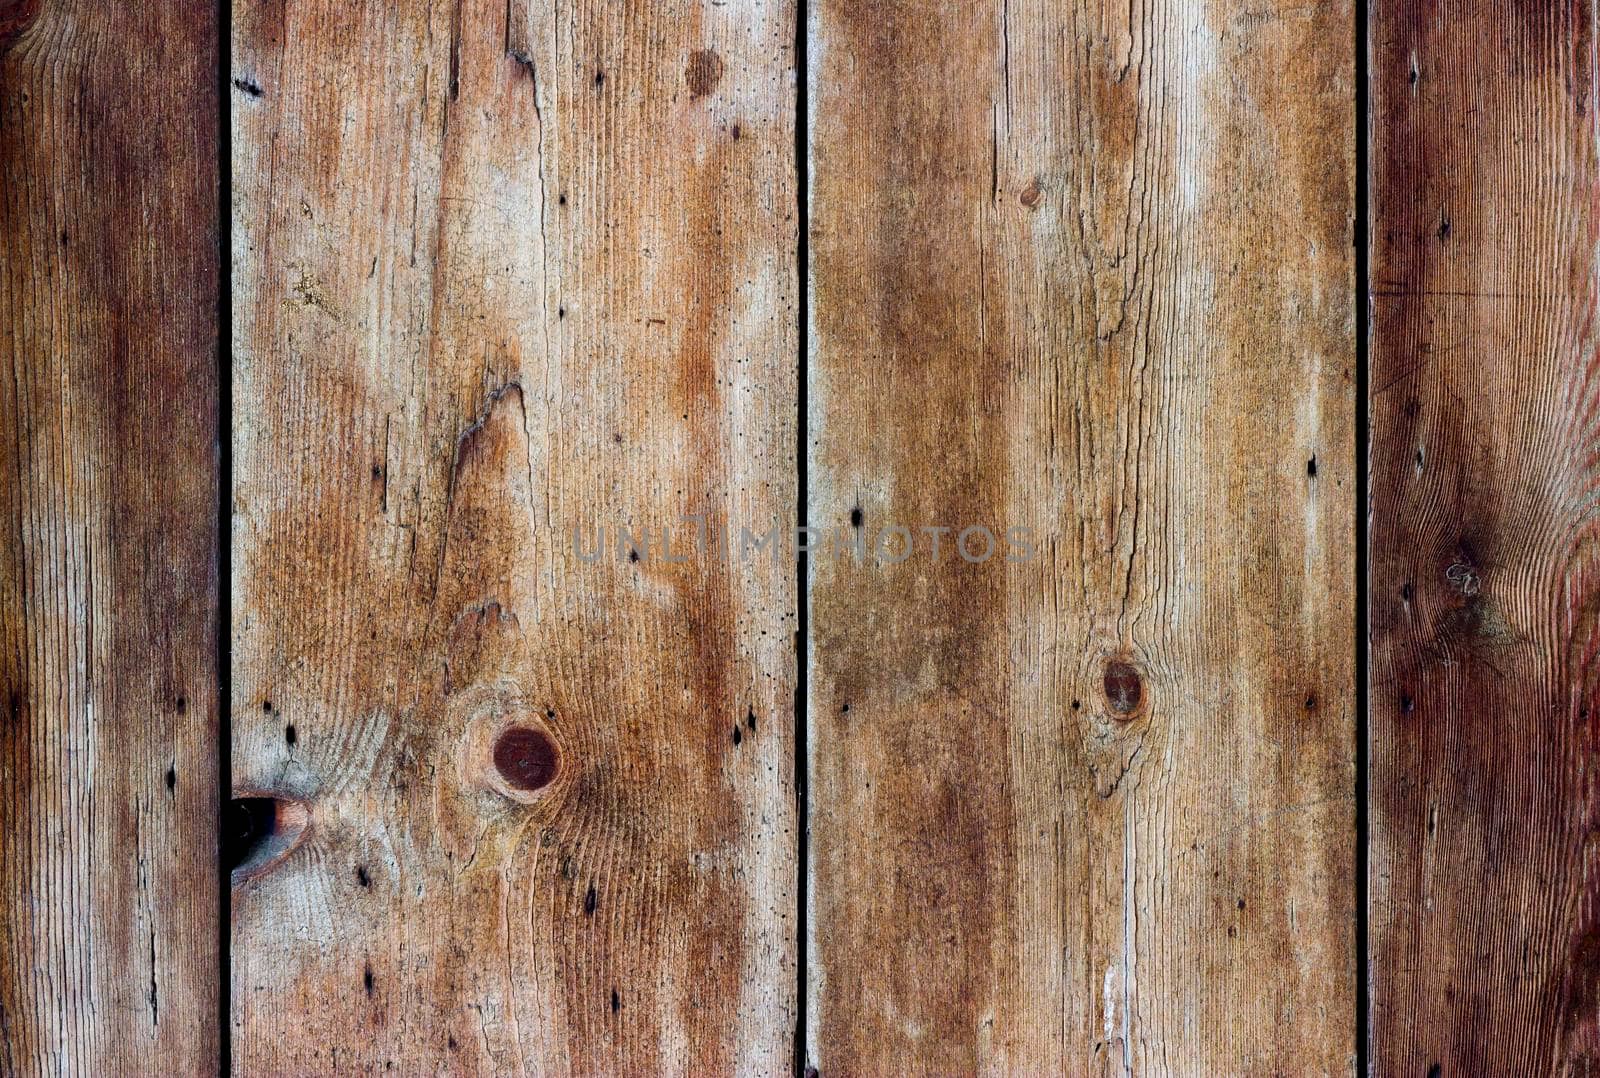 Boards of aged wood arranged vertically. The wood is weathered, heavily textured and coloured yellow, gold and brown.